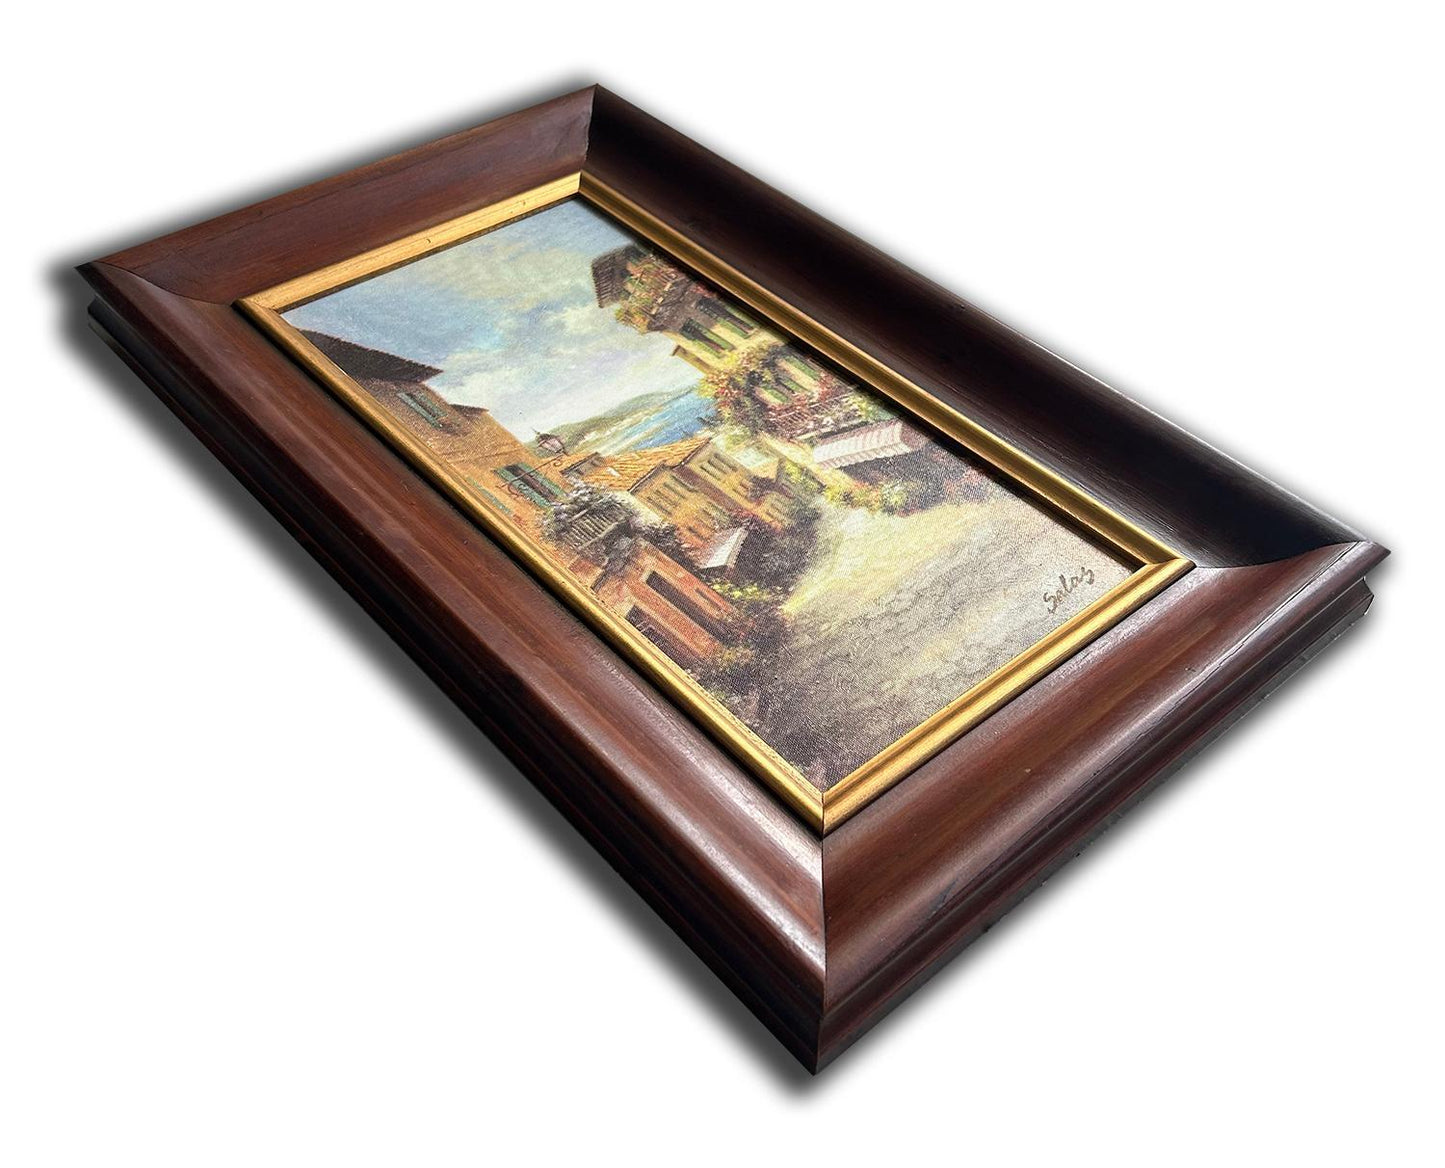 20x40 cm or 8x16 ins, wooden photo frame